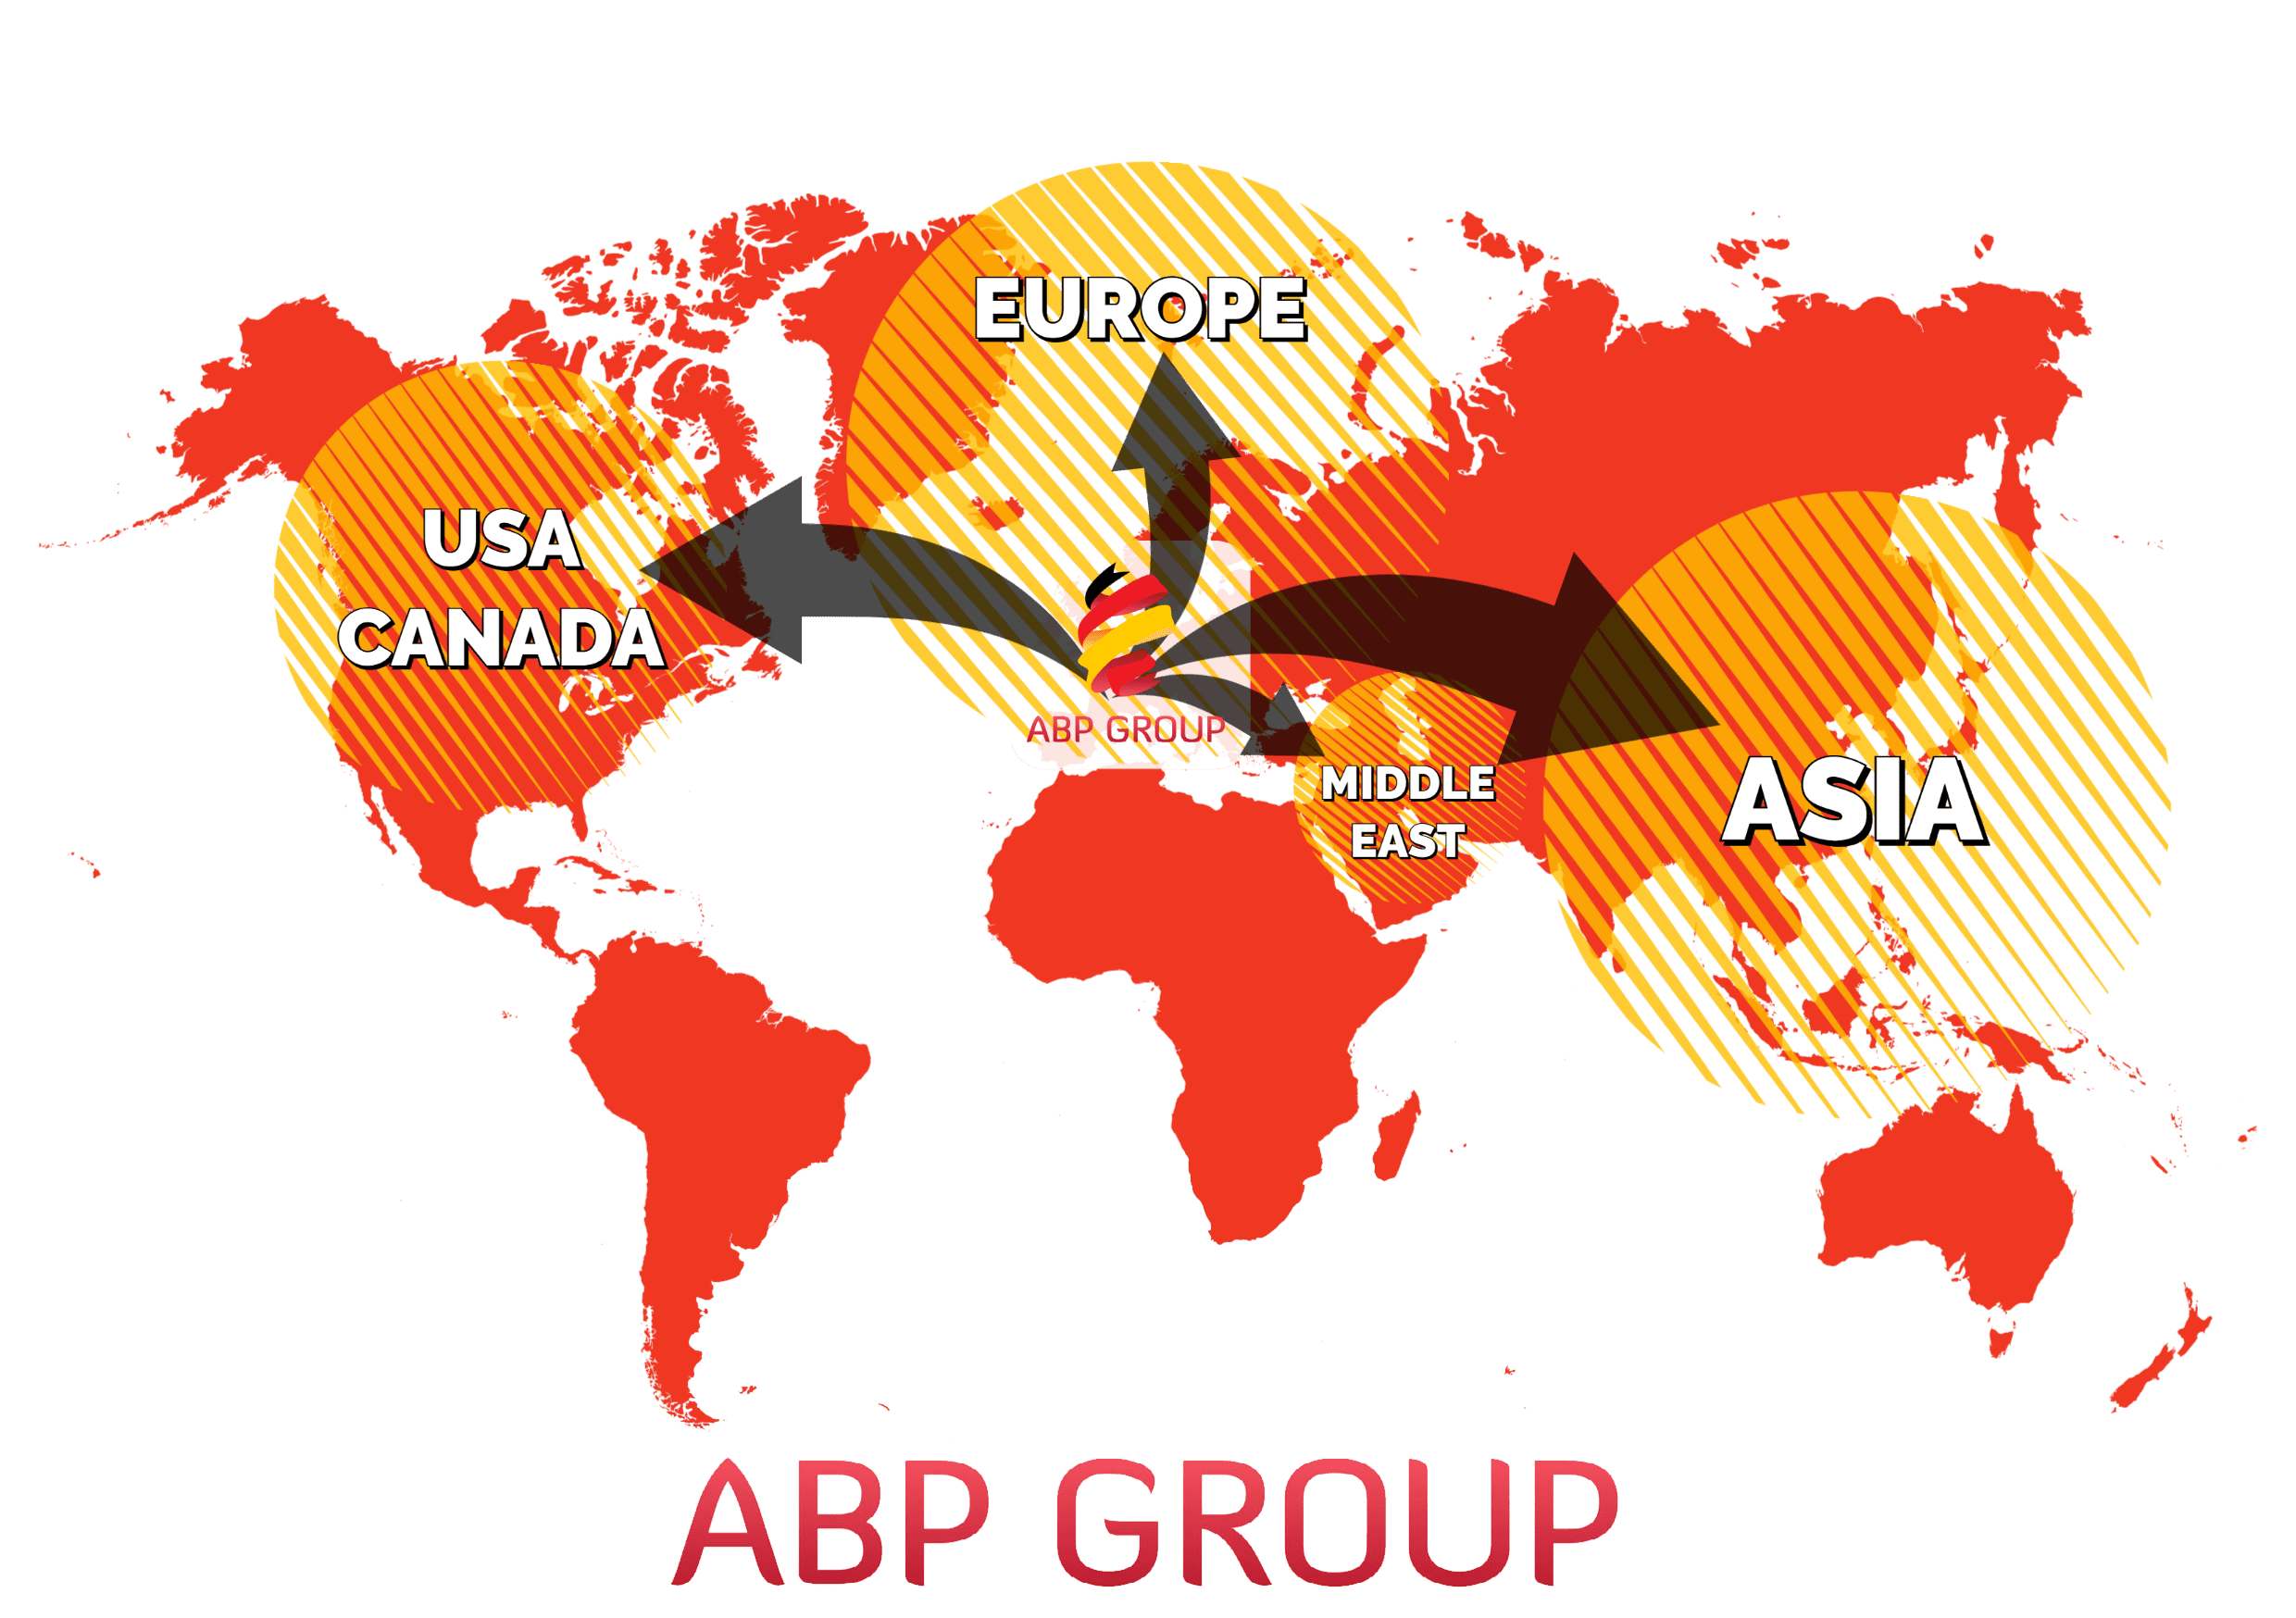 Welcome to ABP GROUP